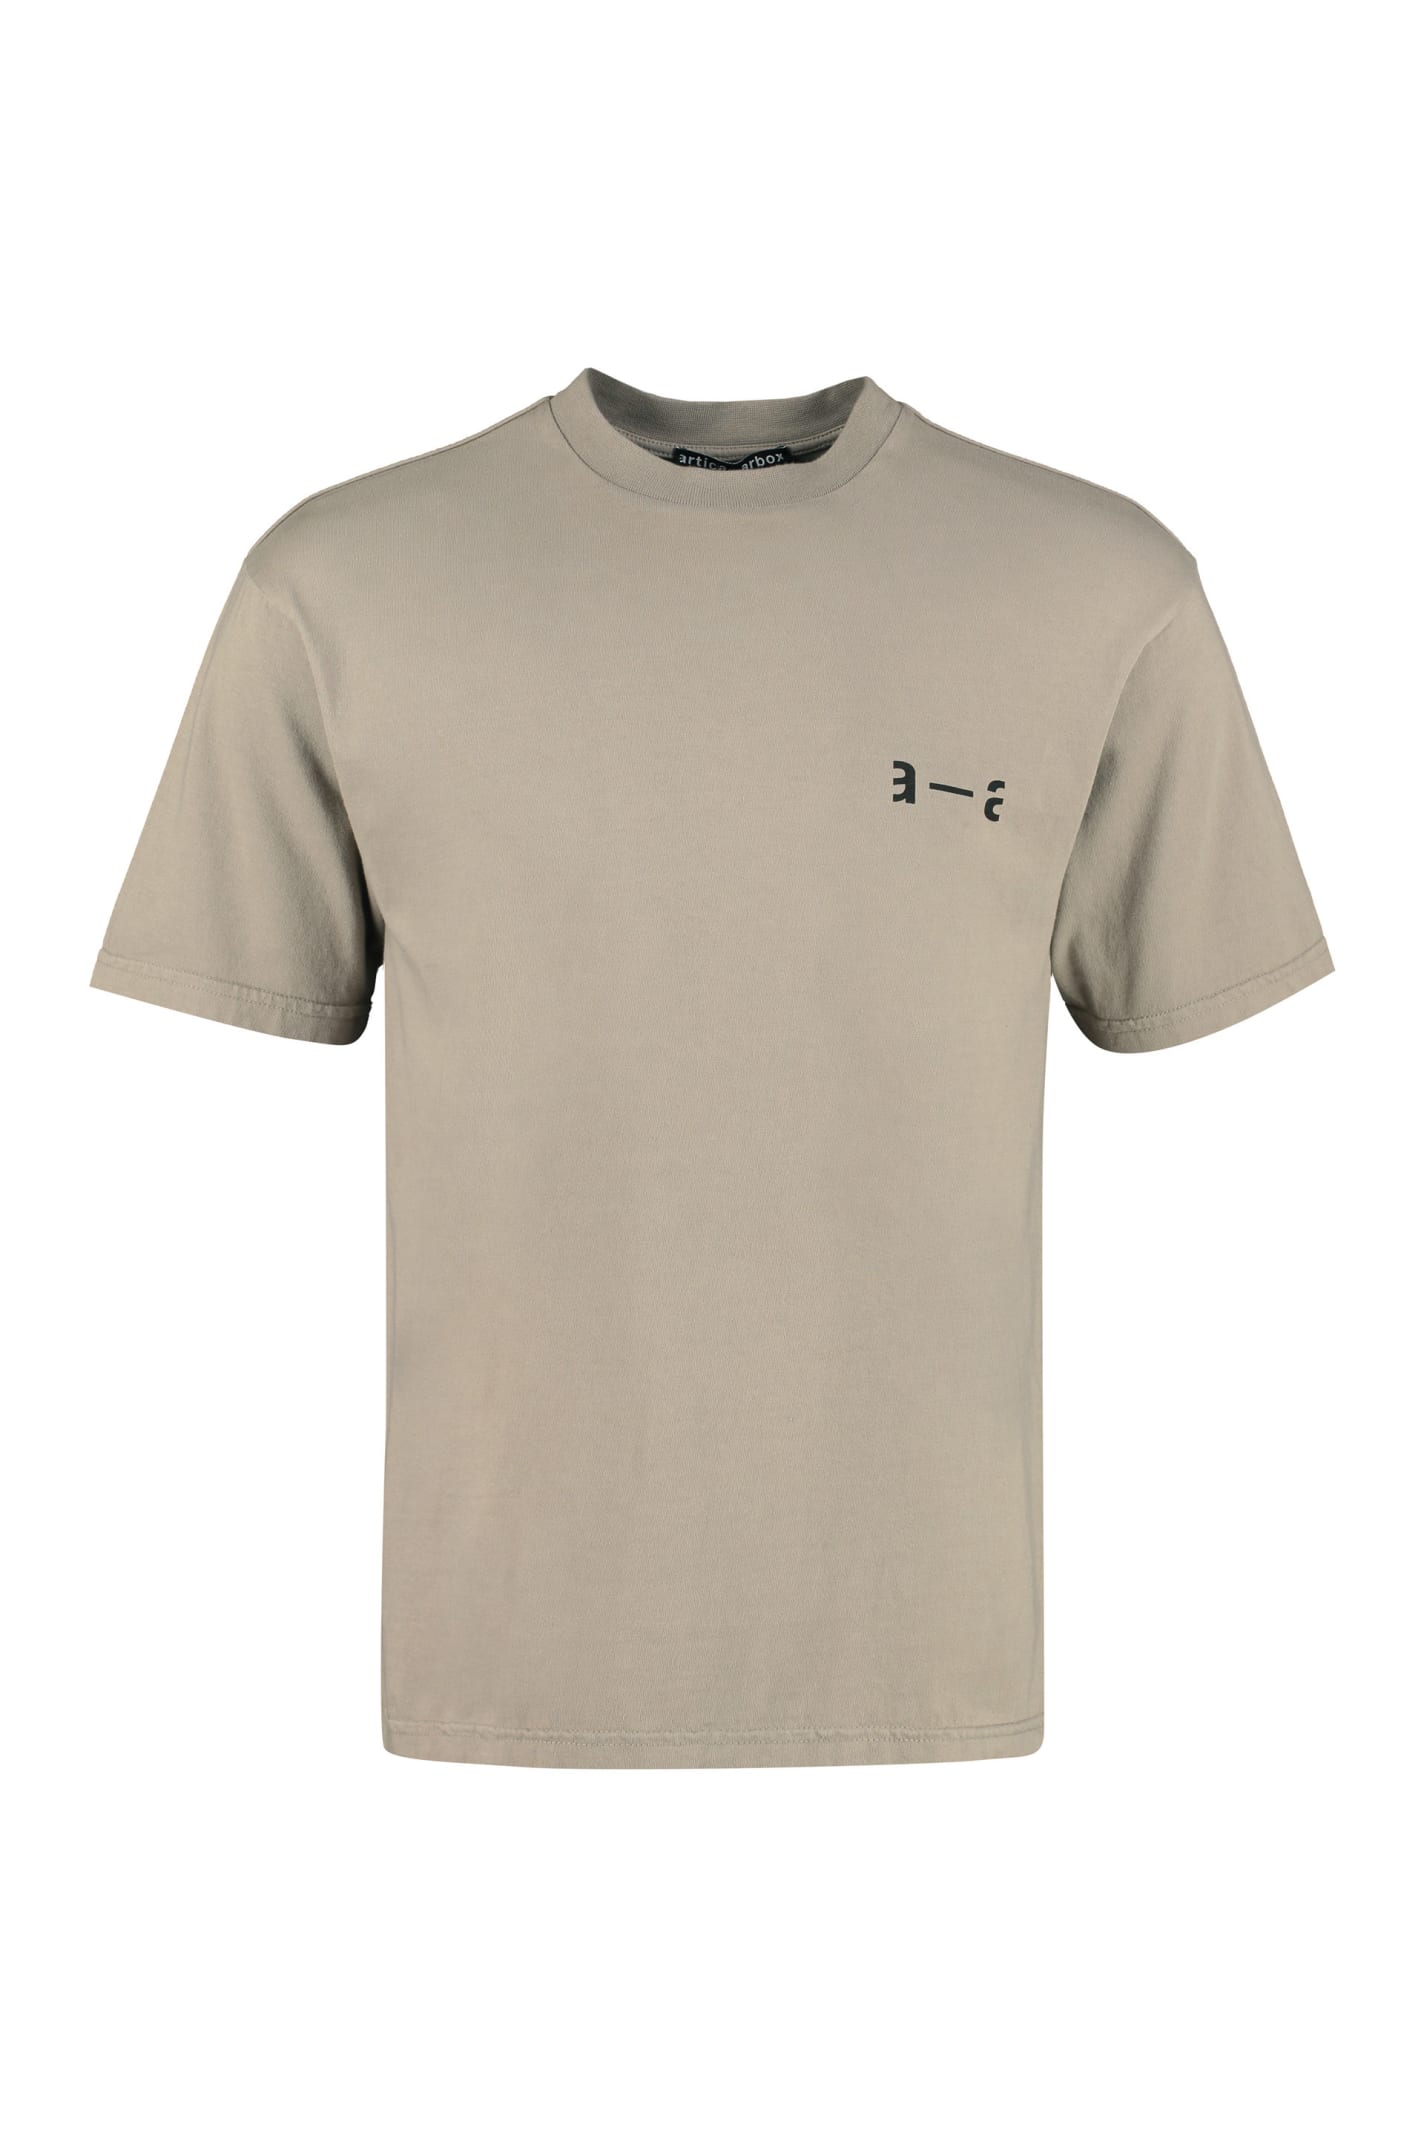 Artica Arbox Logo Print Cotton T-shirt In Taupe